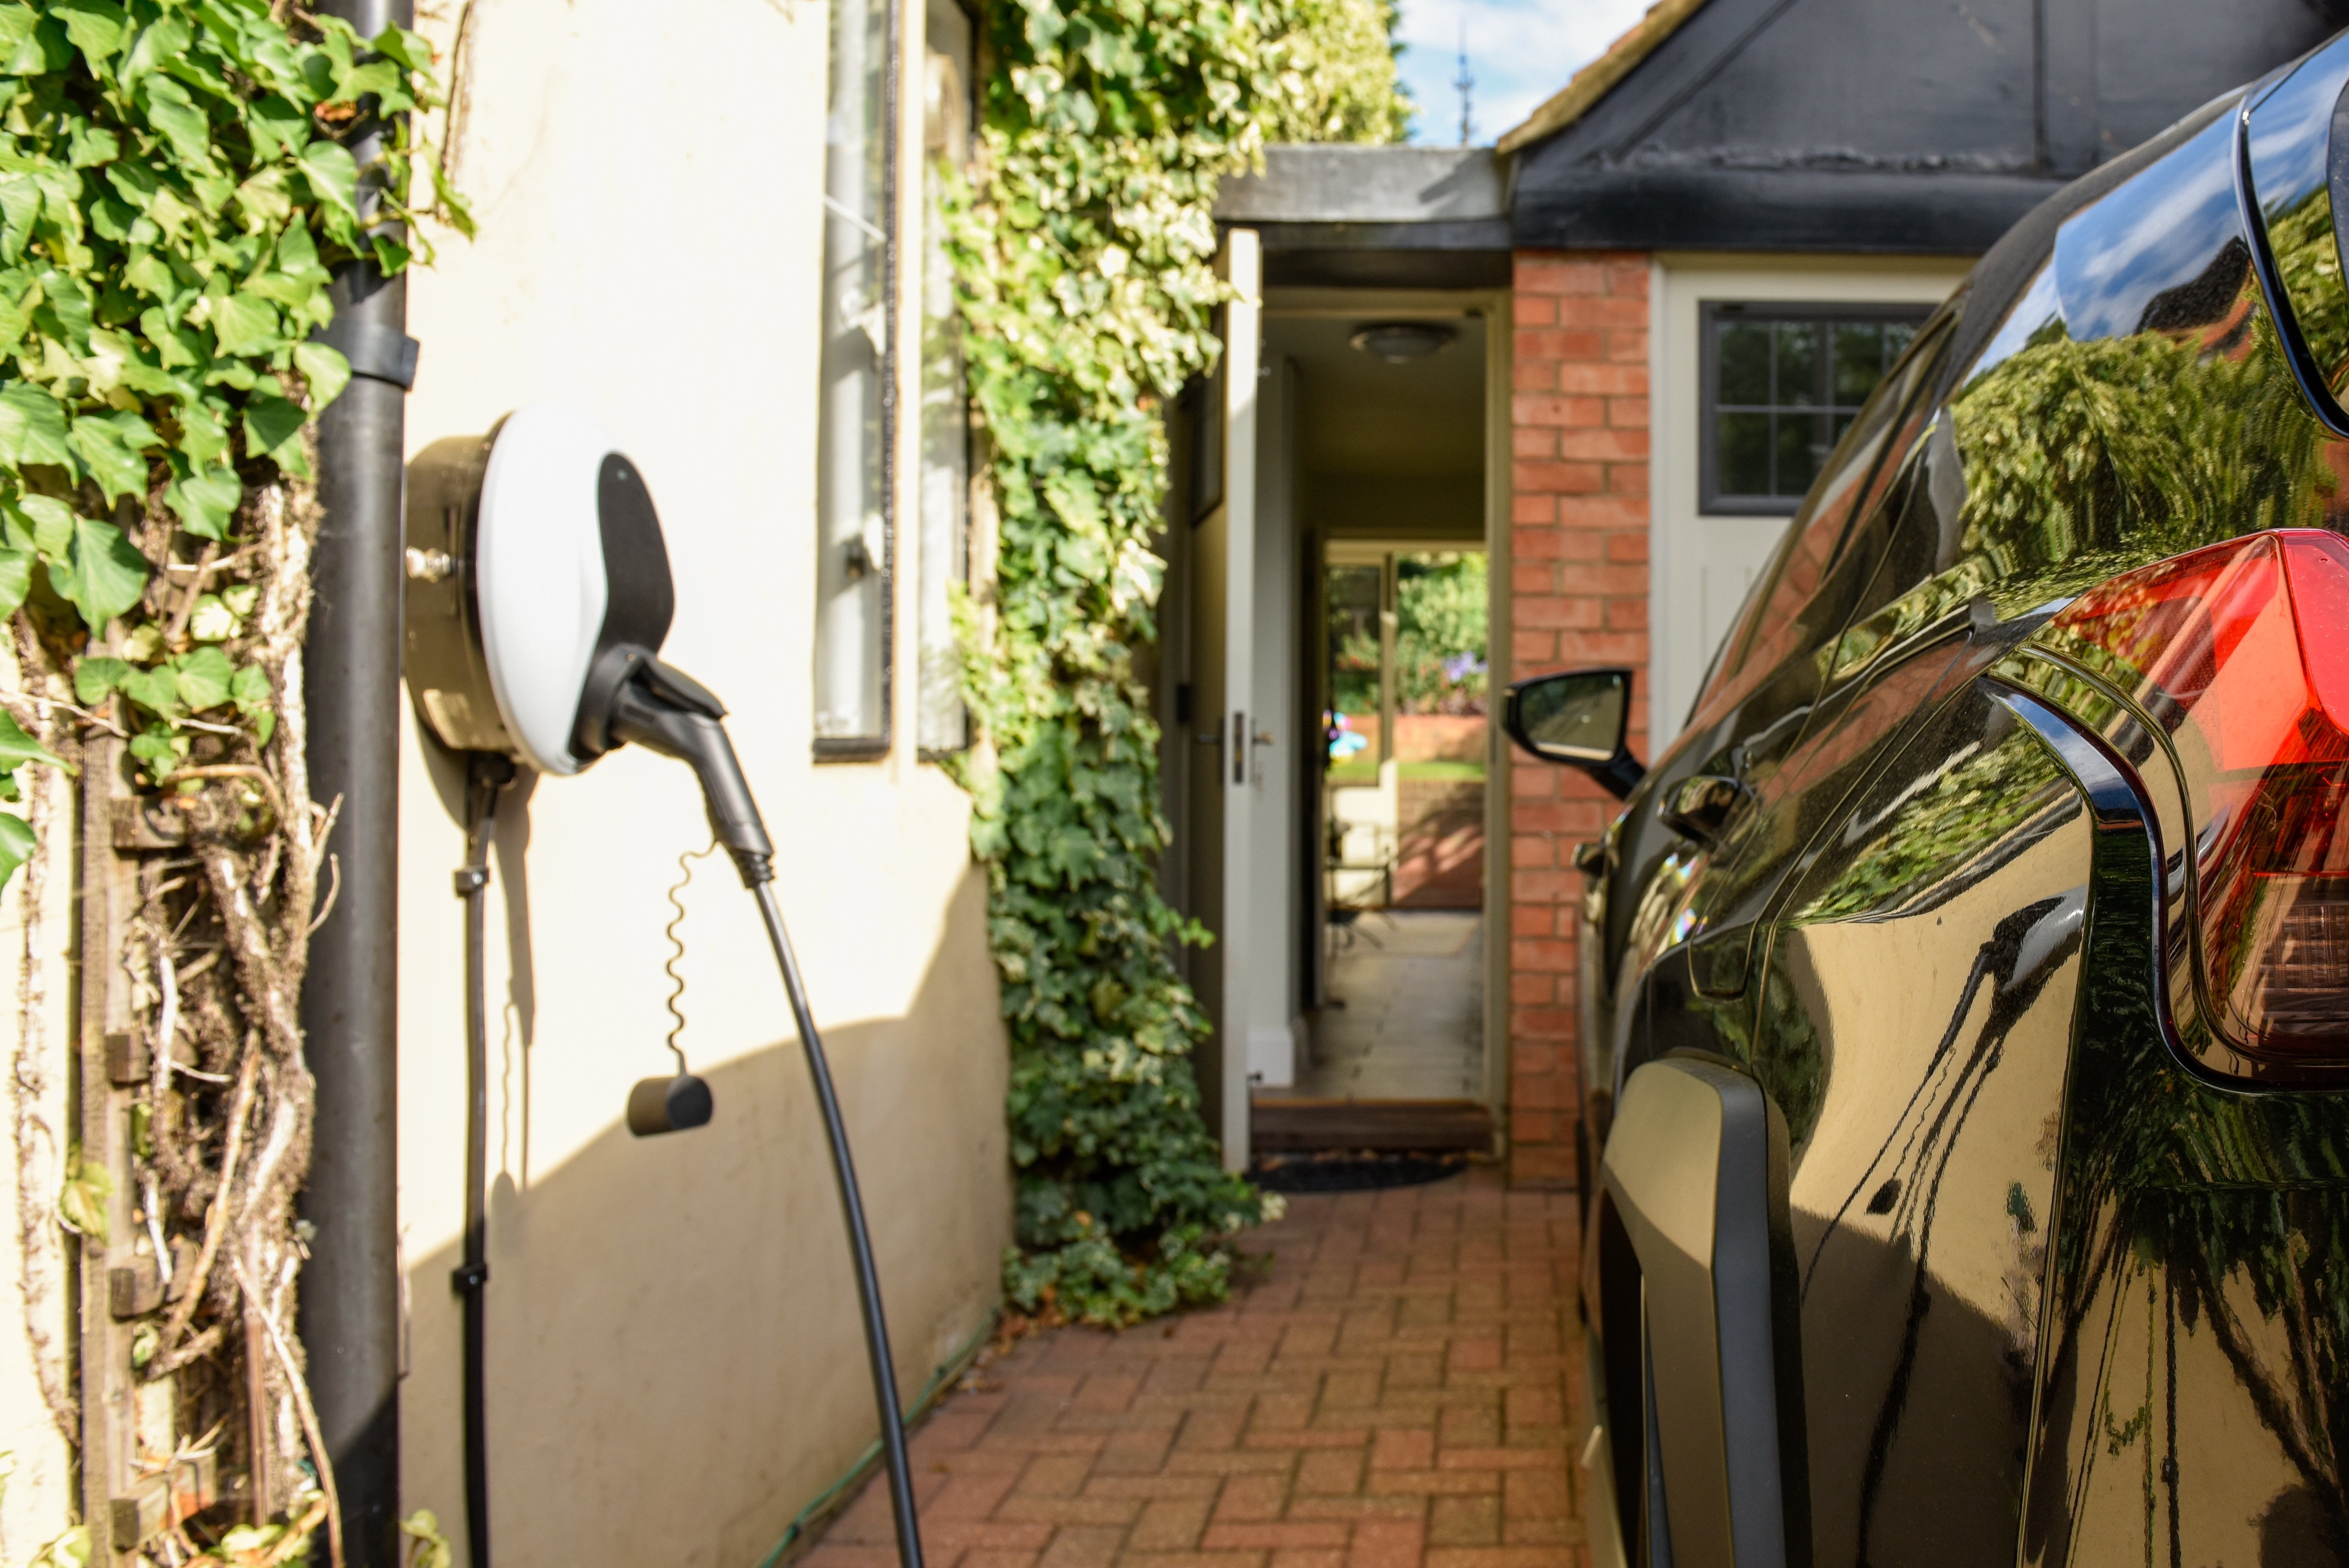 You might need a house with an EV charge point